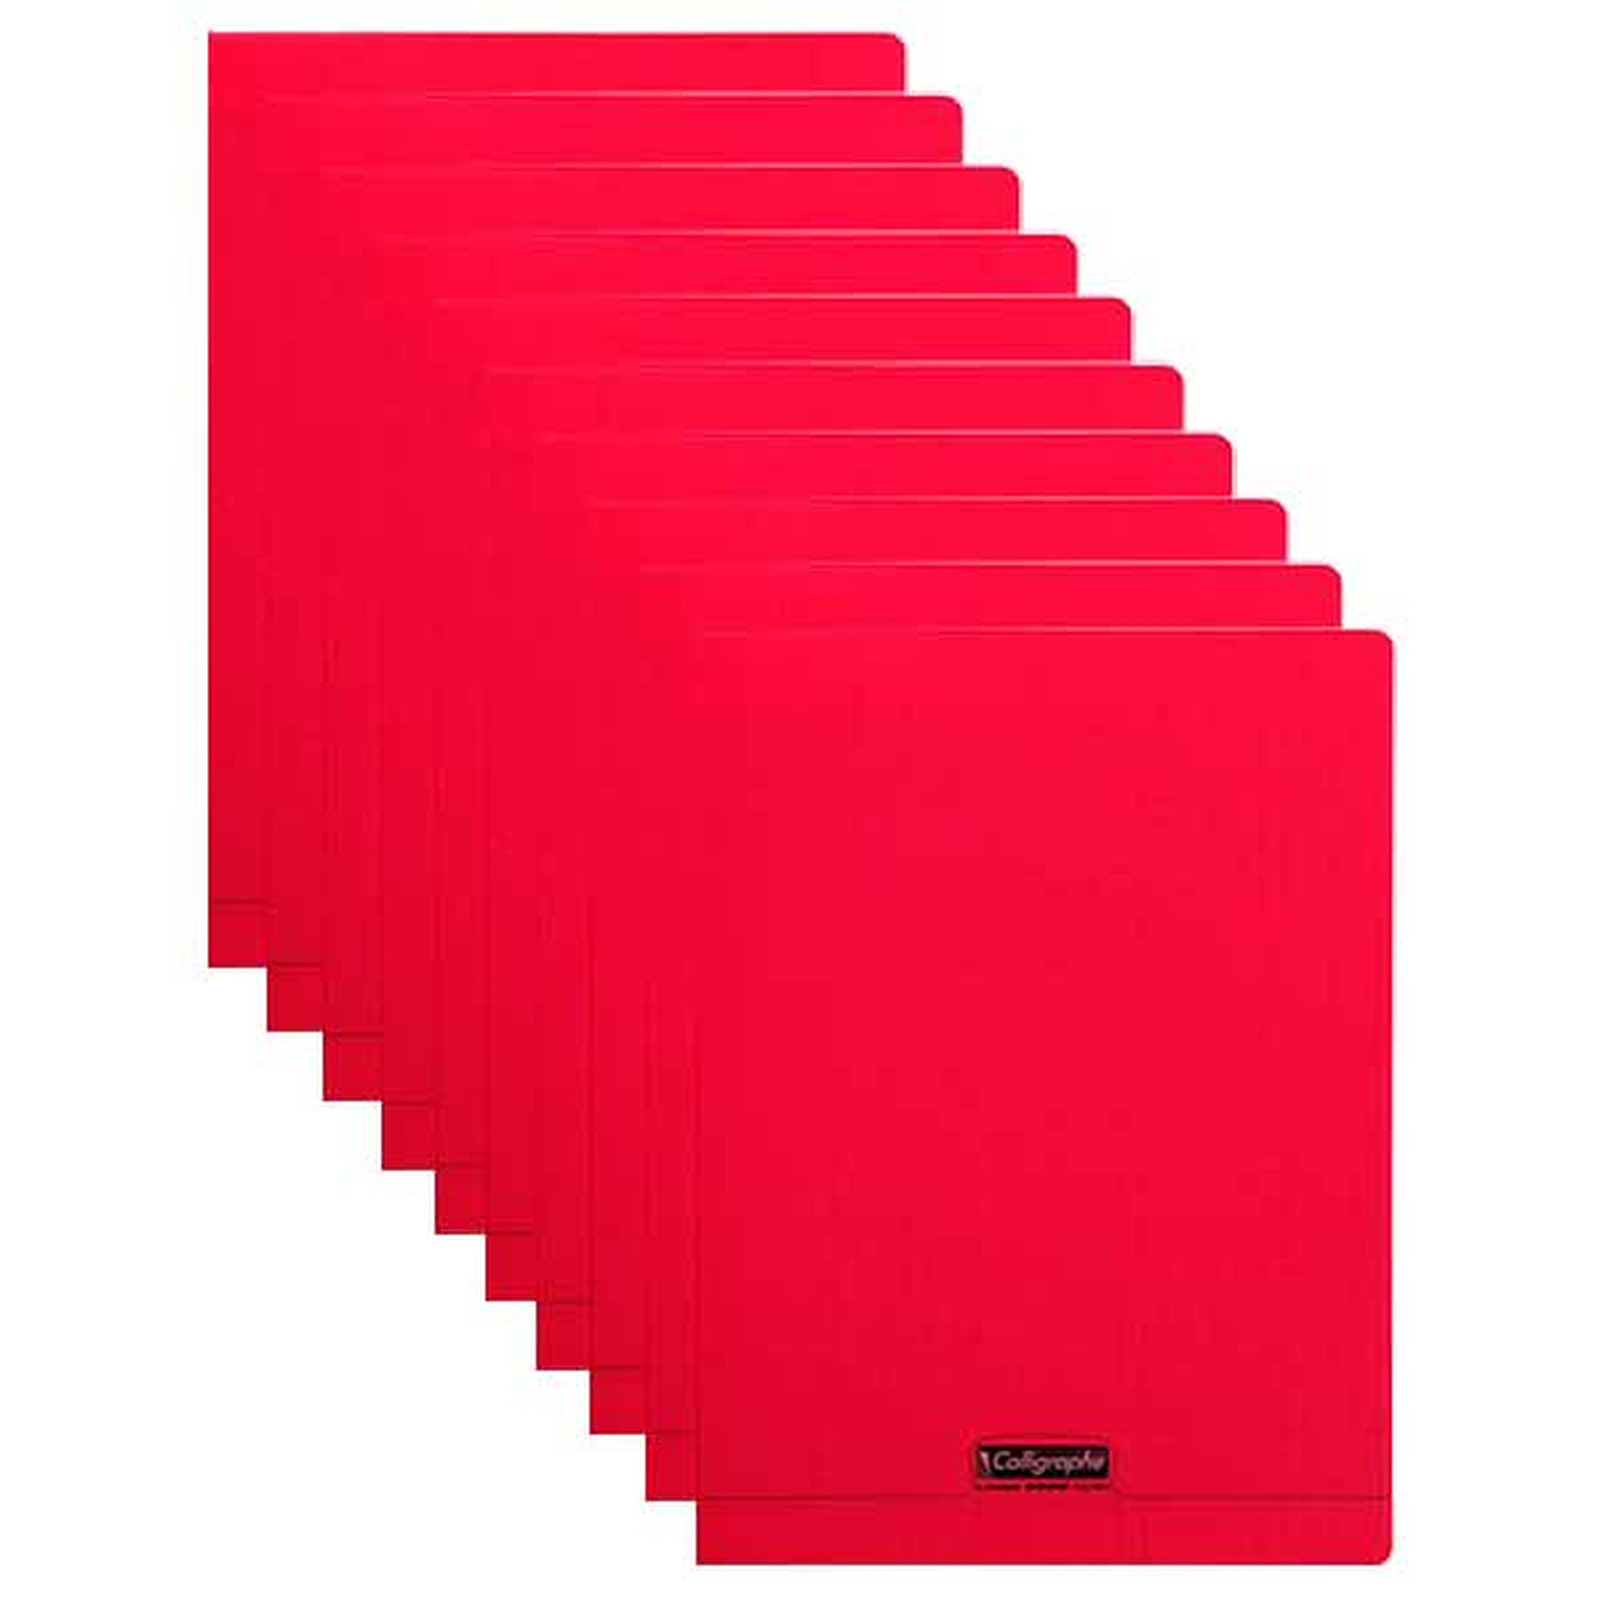 Calligraphe 8000 Polypro Cahier 96 pages 24 x 32 cm seyes grands carreaux Rouge x 10 - Cahier Calligraphe